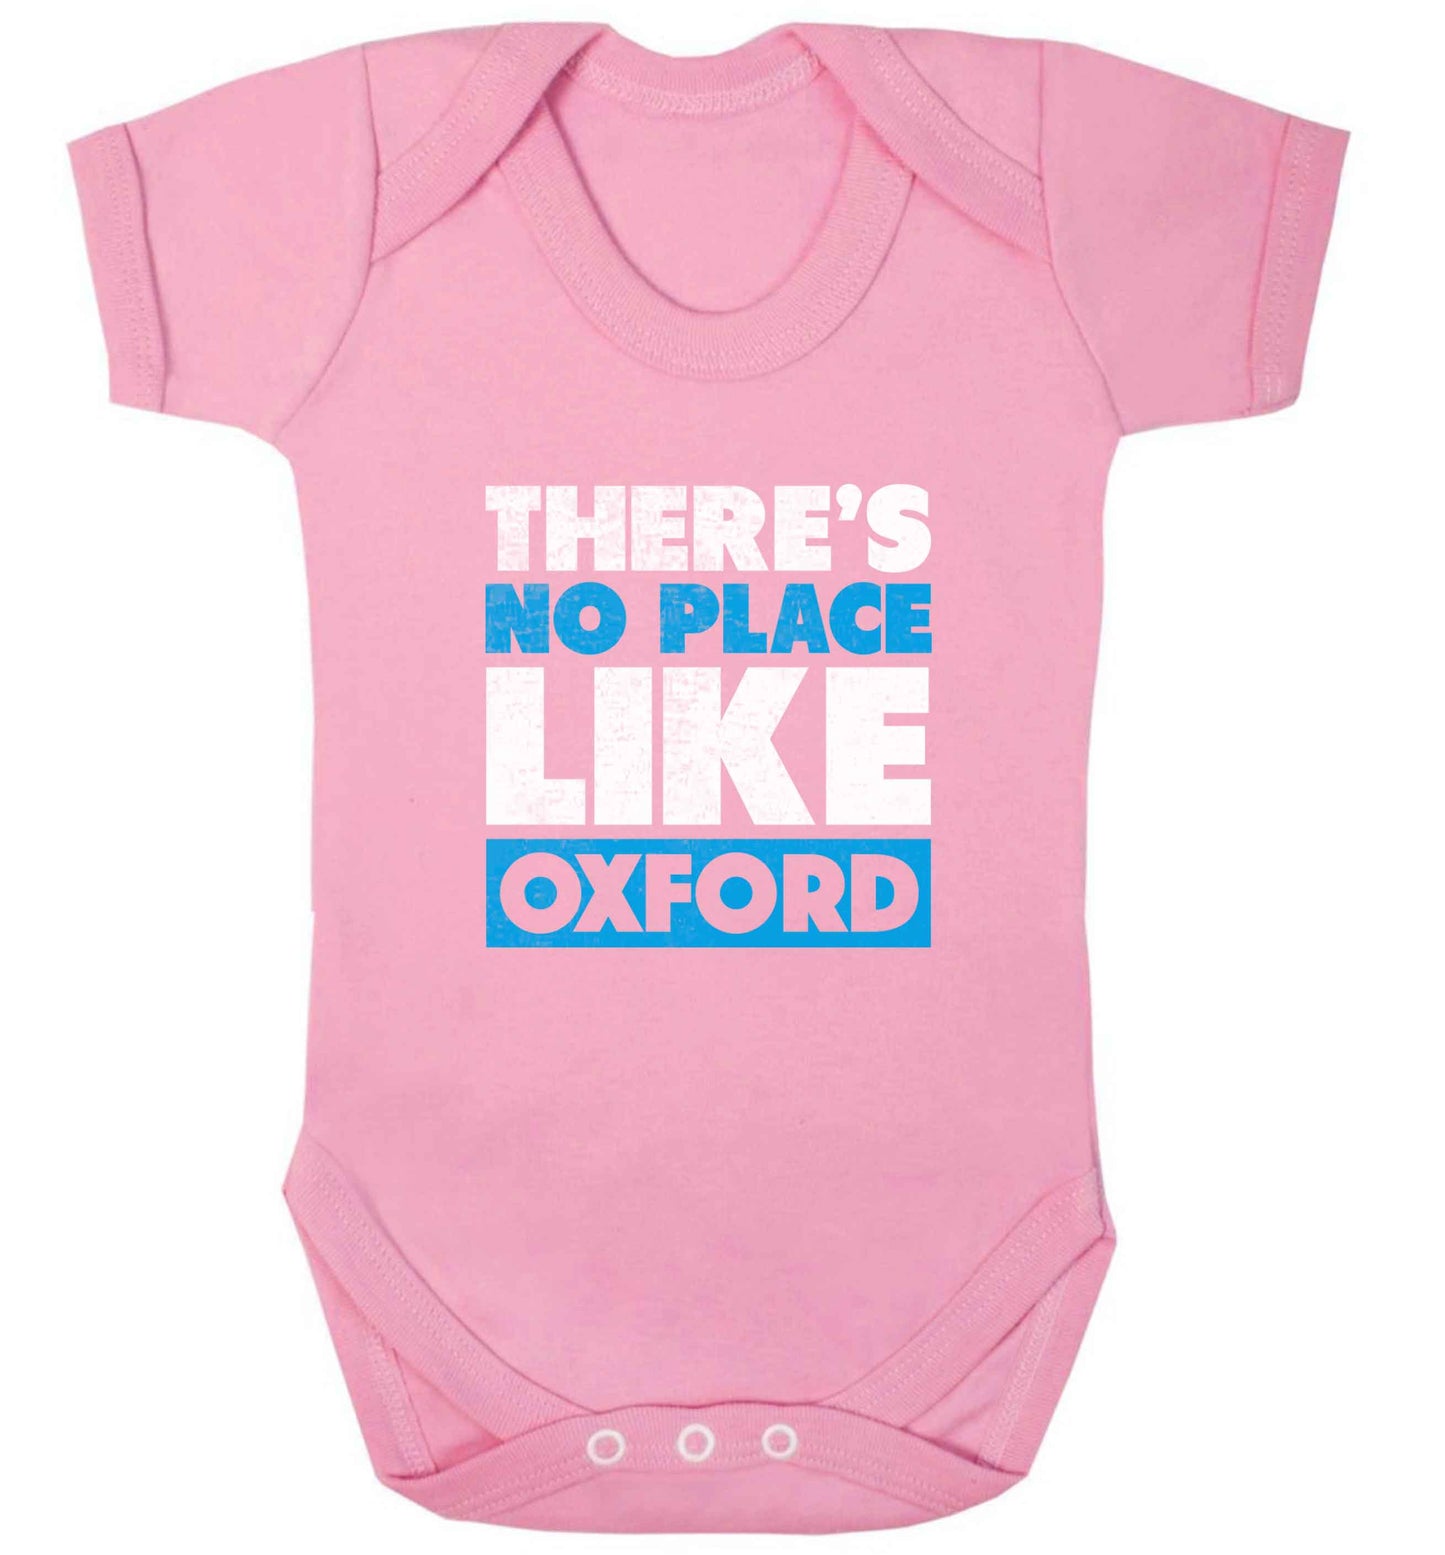 There's no place like Oxford baby vest pale pink 18-24 months